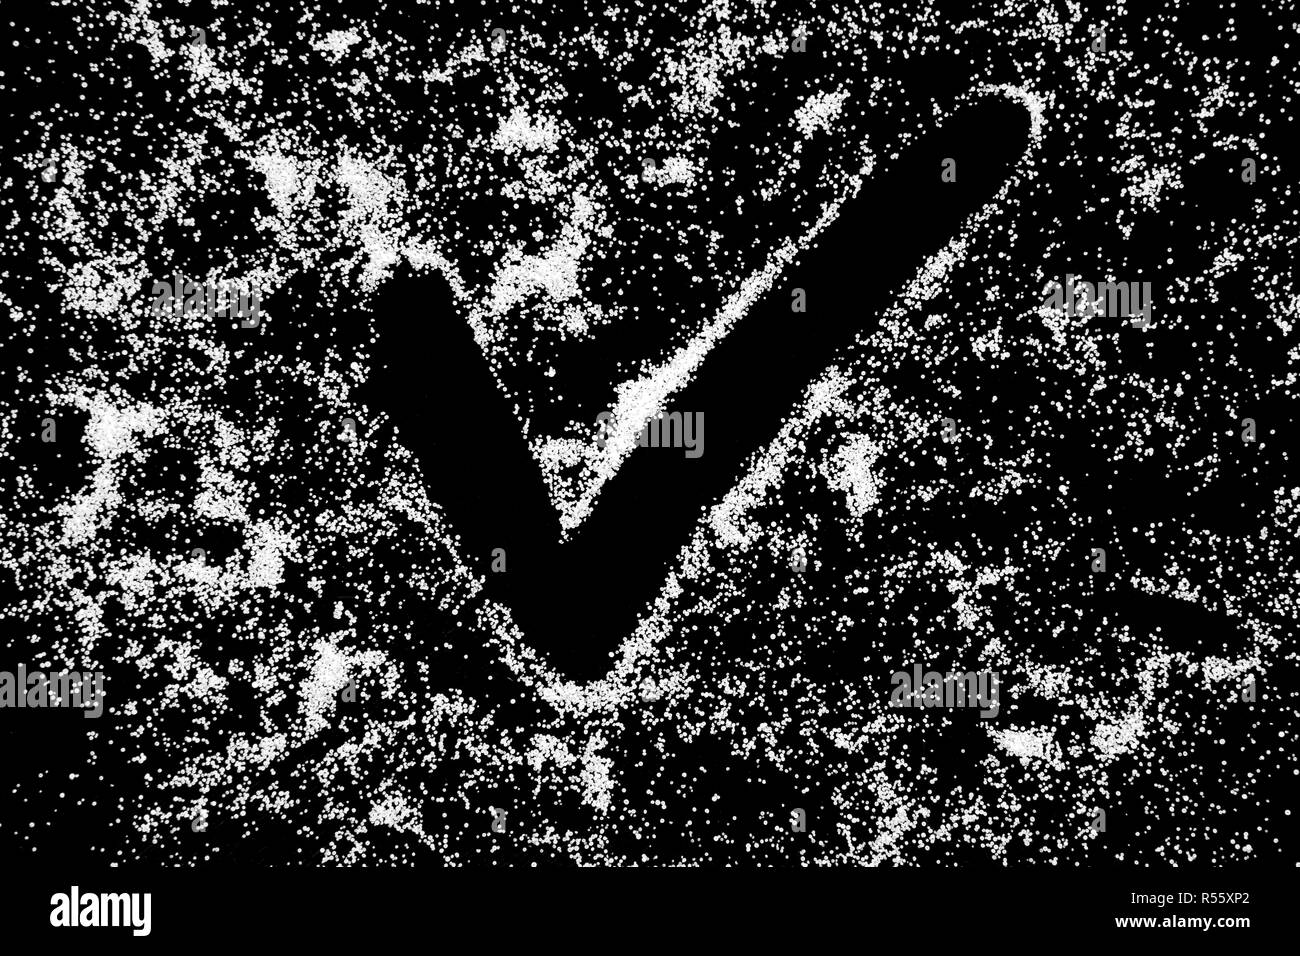 Checking mark symbol drawing by finger on white snow salt powder on black background. Tick concept with place for text. Copy space. Stock Photo